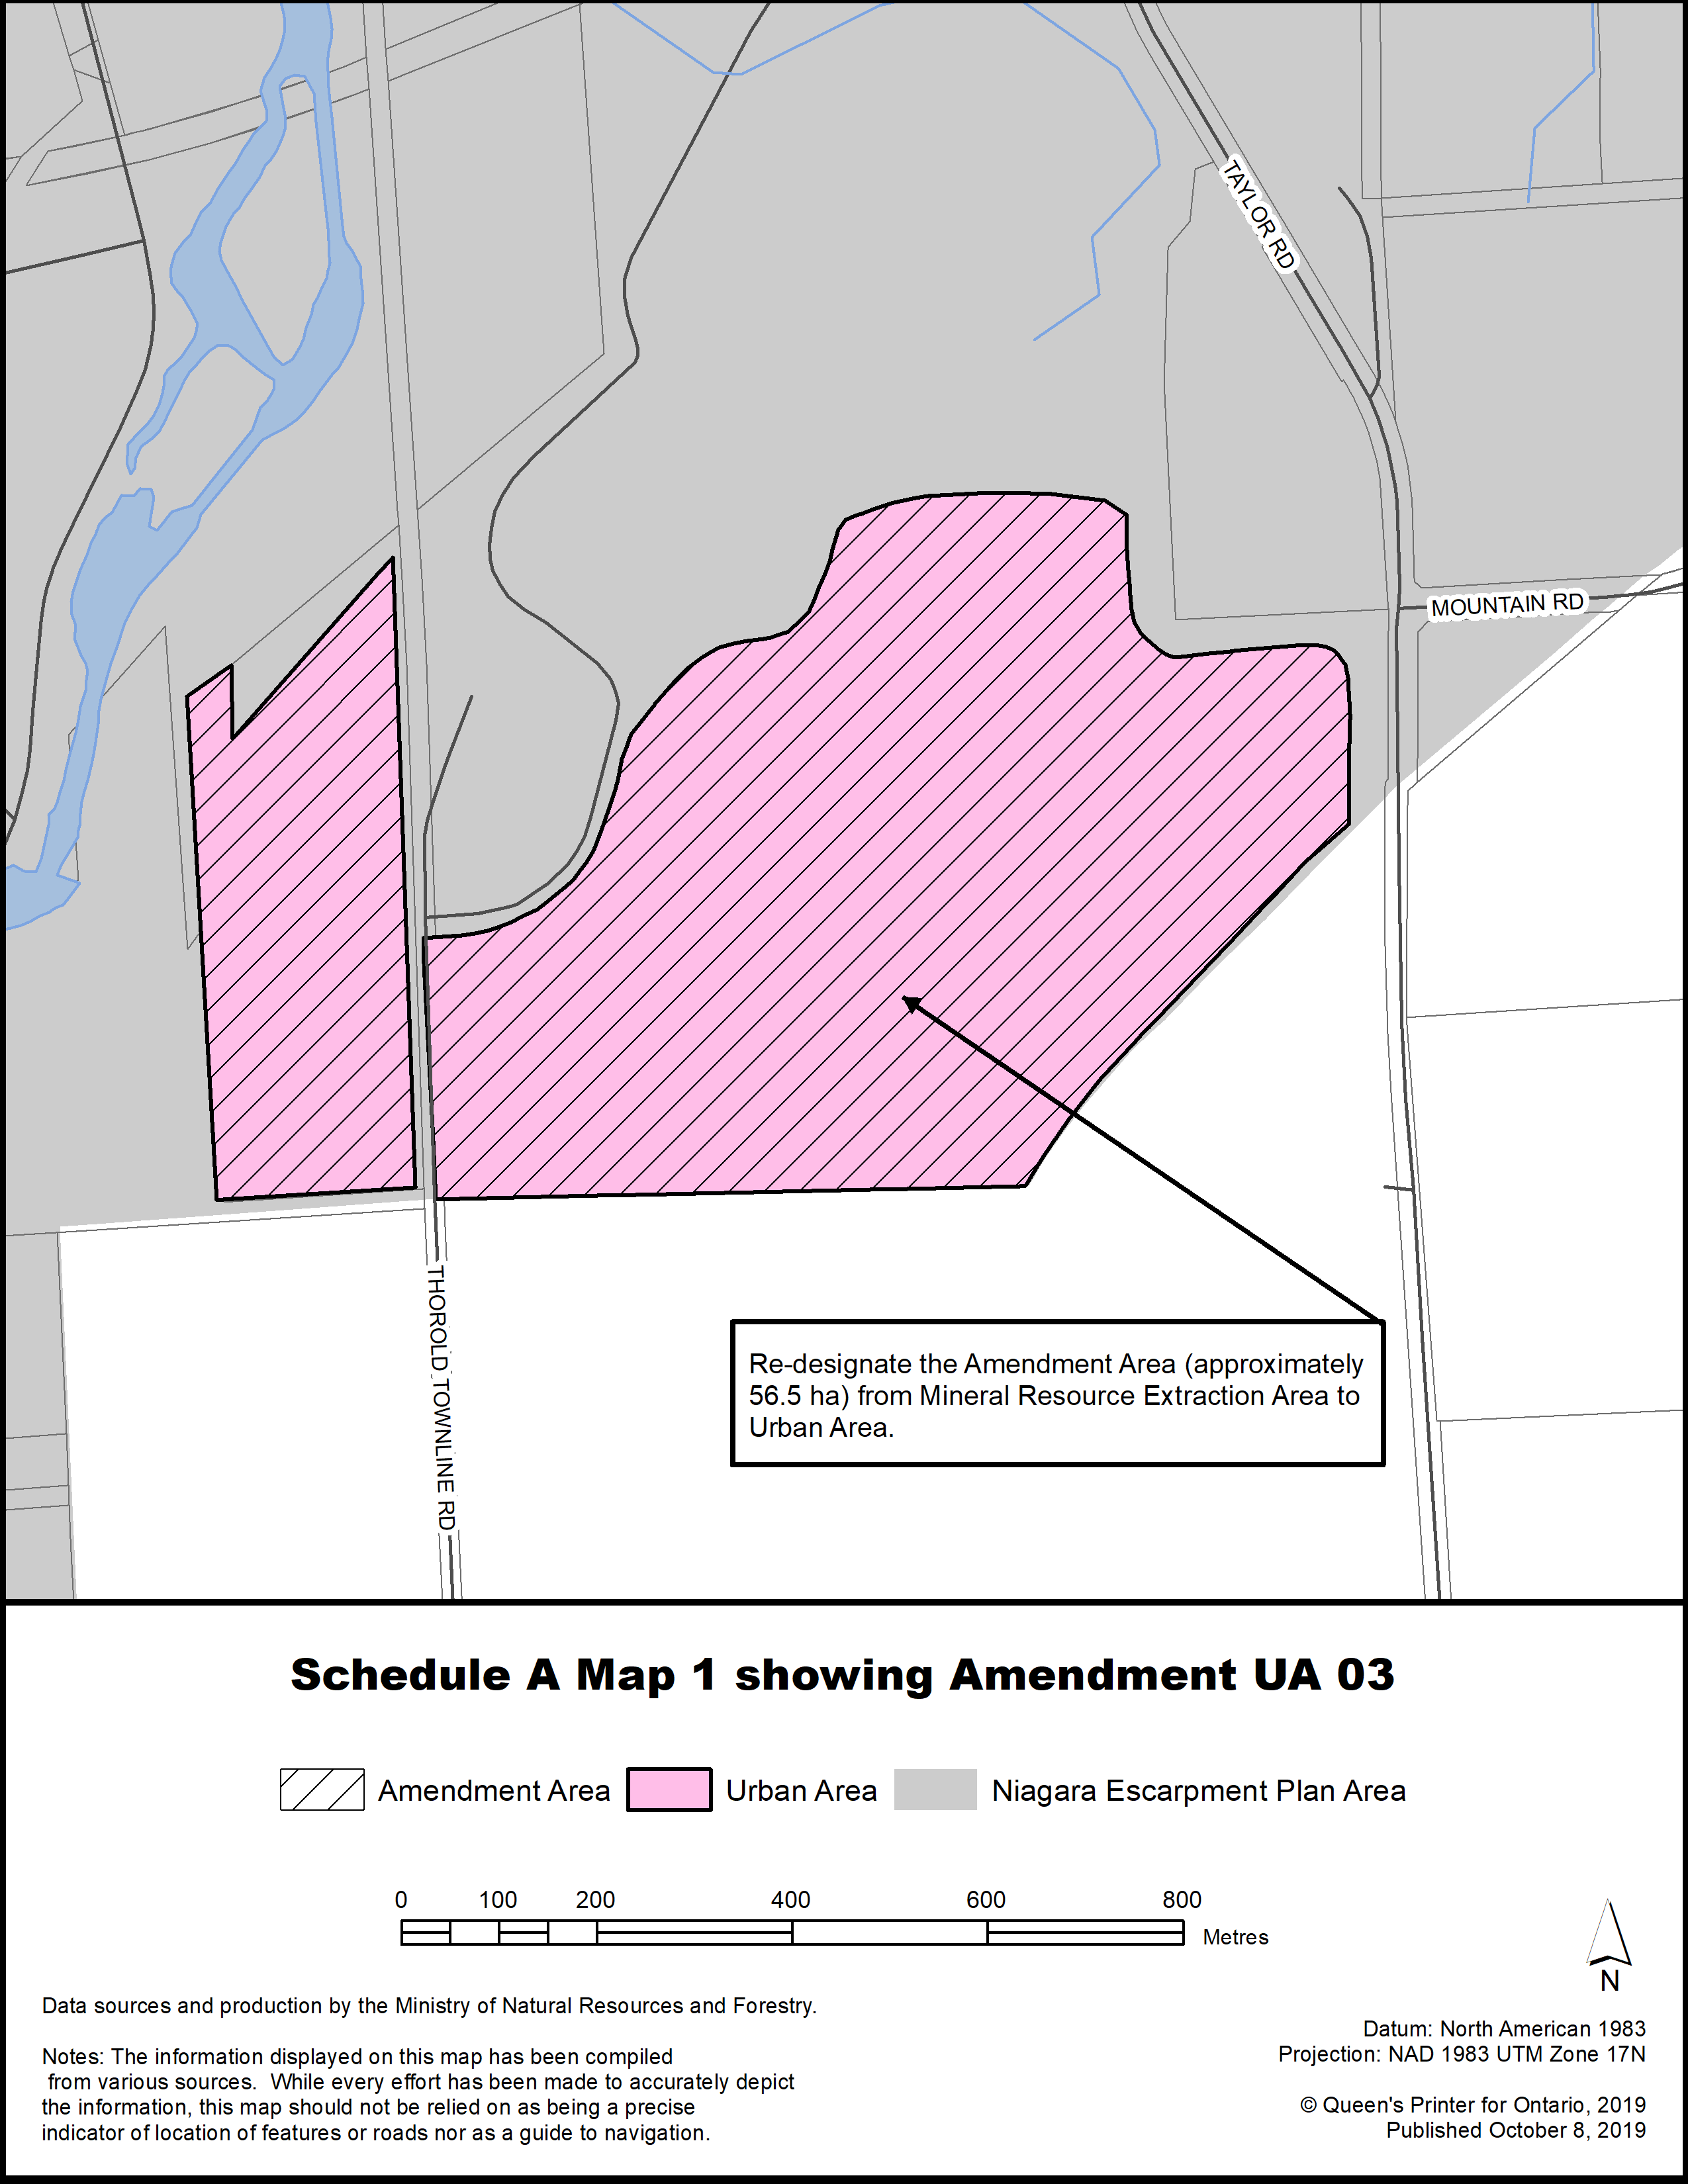 Schedule A Map 1 showing Amendment UA 03.
Re-designate the Amendment Area (approximately 56.5 ha) from Mineral Resource Extraction Area to Urban Area)